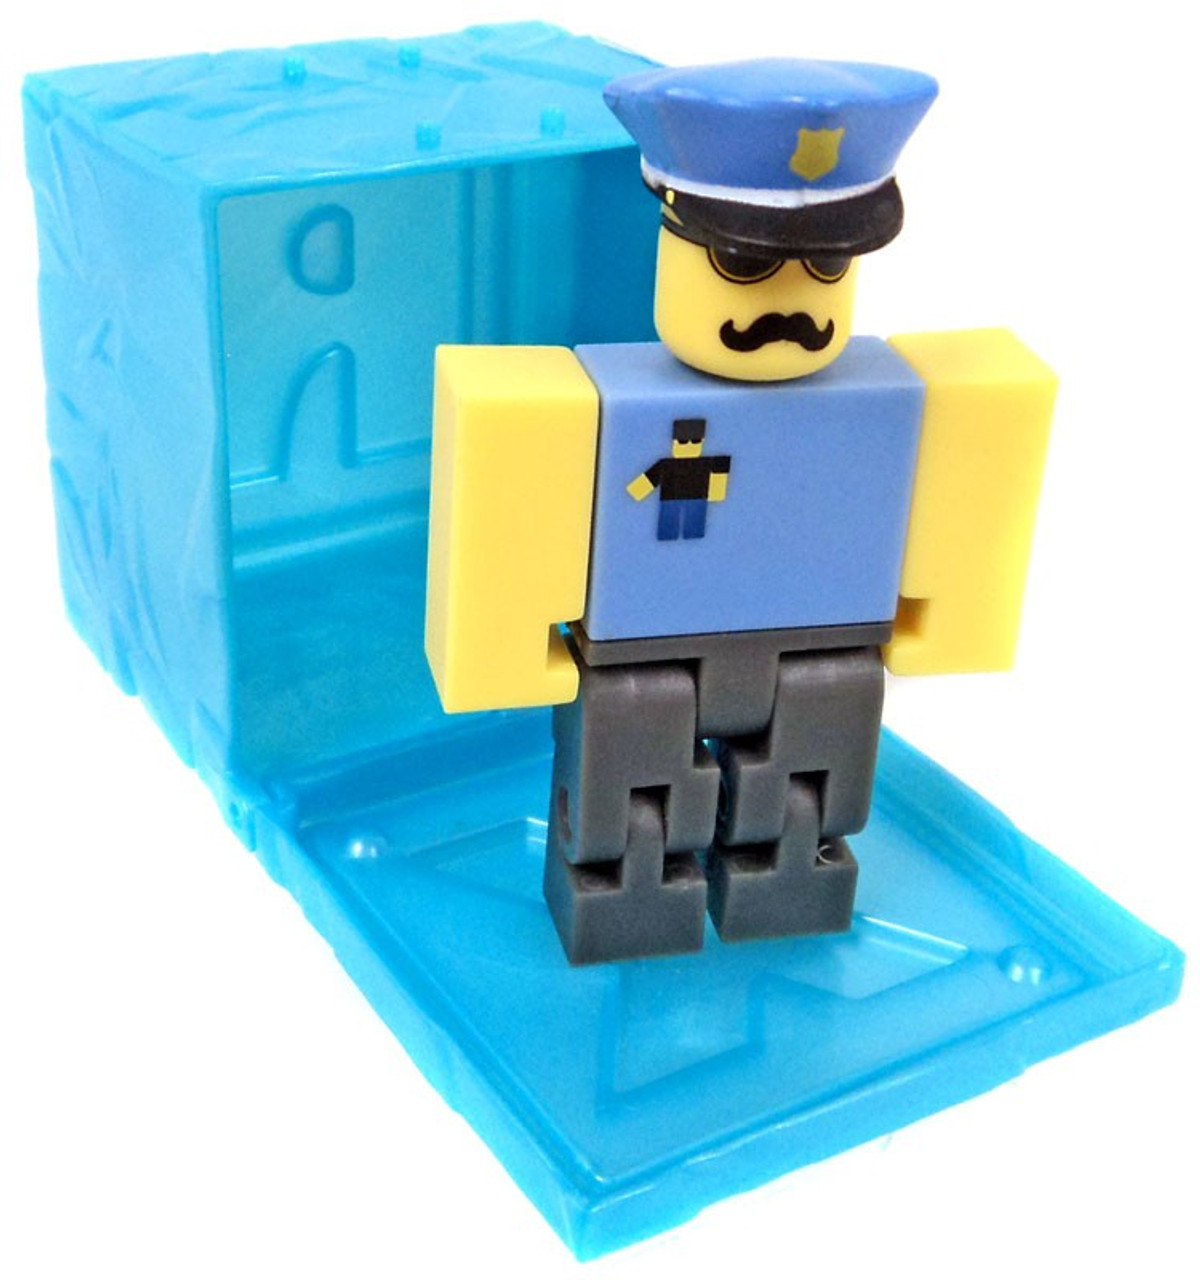 Roblox Red Series 3 Retail Tycoon Rent A Cop 3 Mini Figure Blue Cube With Online Code Loose Jazwares Toywiz - how to play retail tycoon roblox